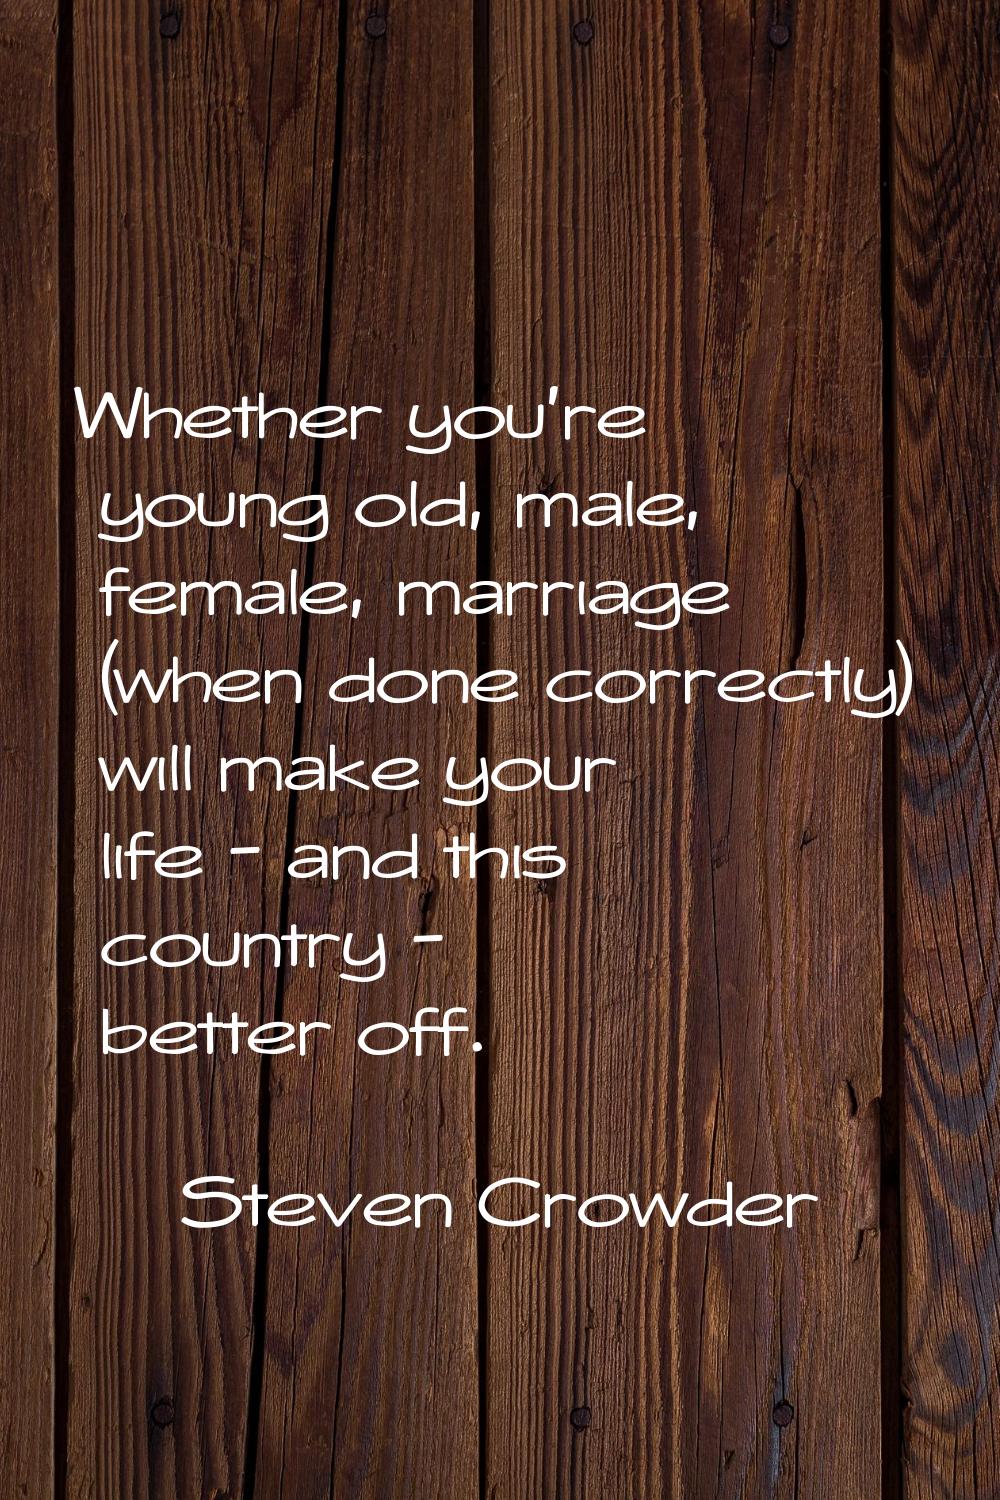 Whether you're young old, male, female, marriage (when done correctly) will make your life - and th